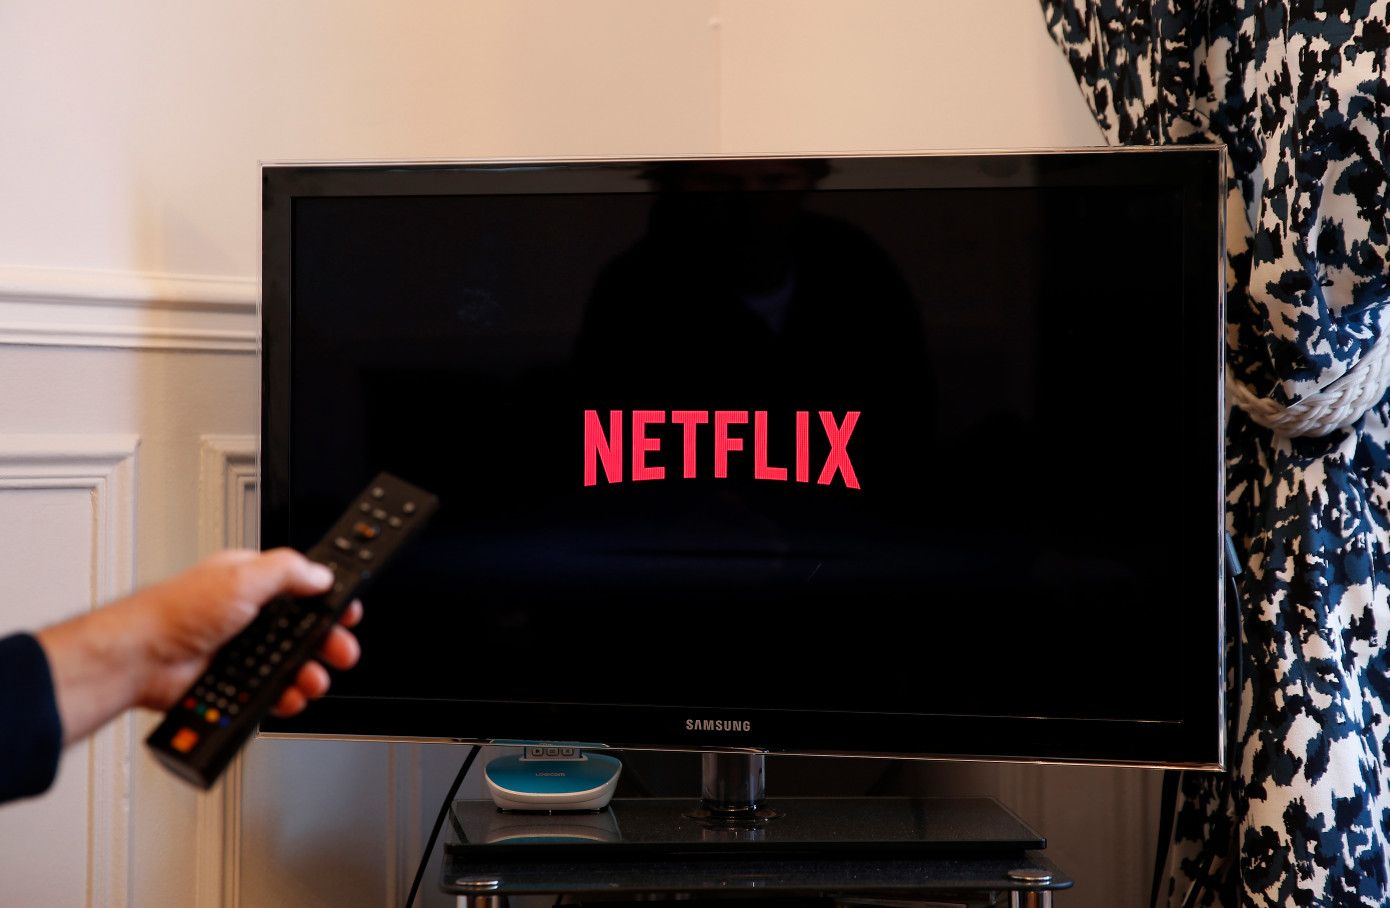 How To Watch Netflix On A Non Smart TV